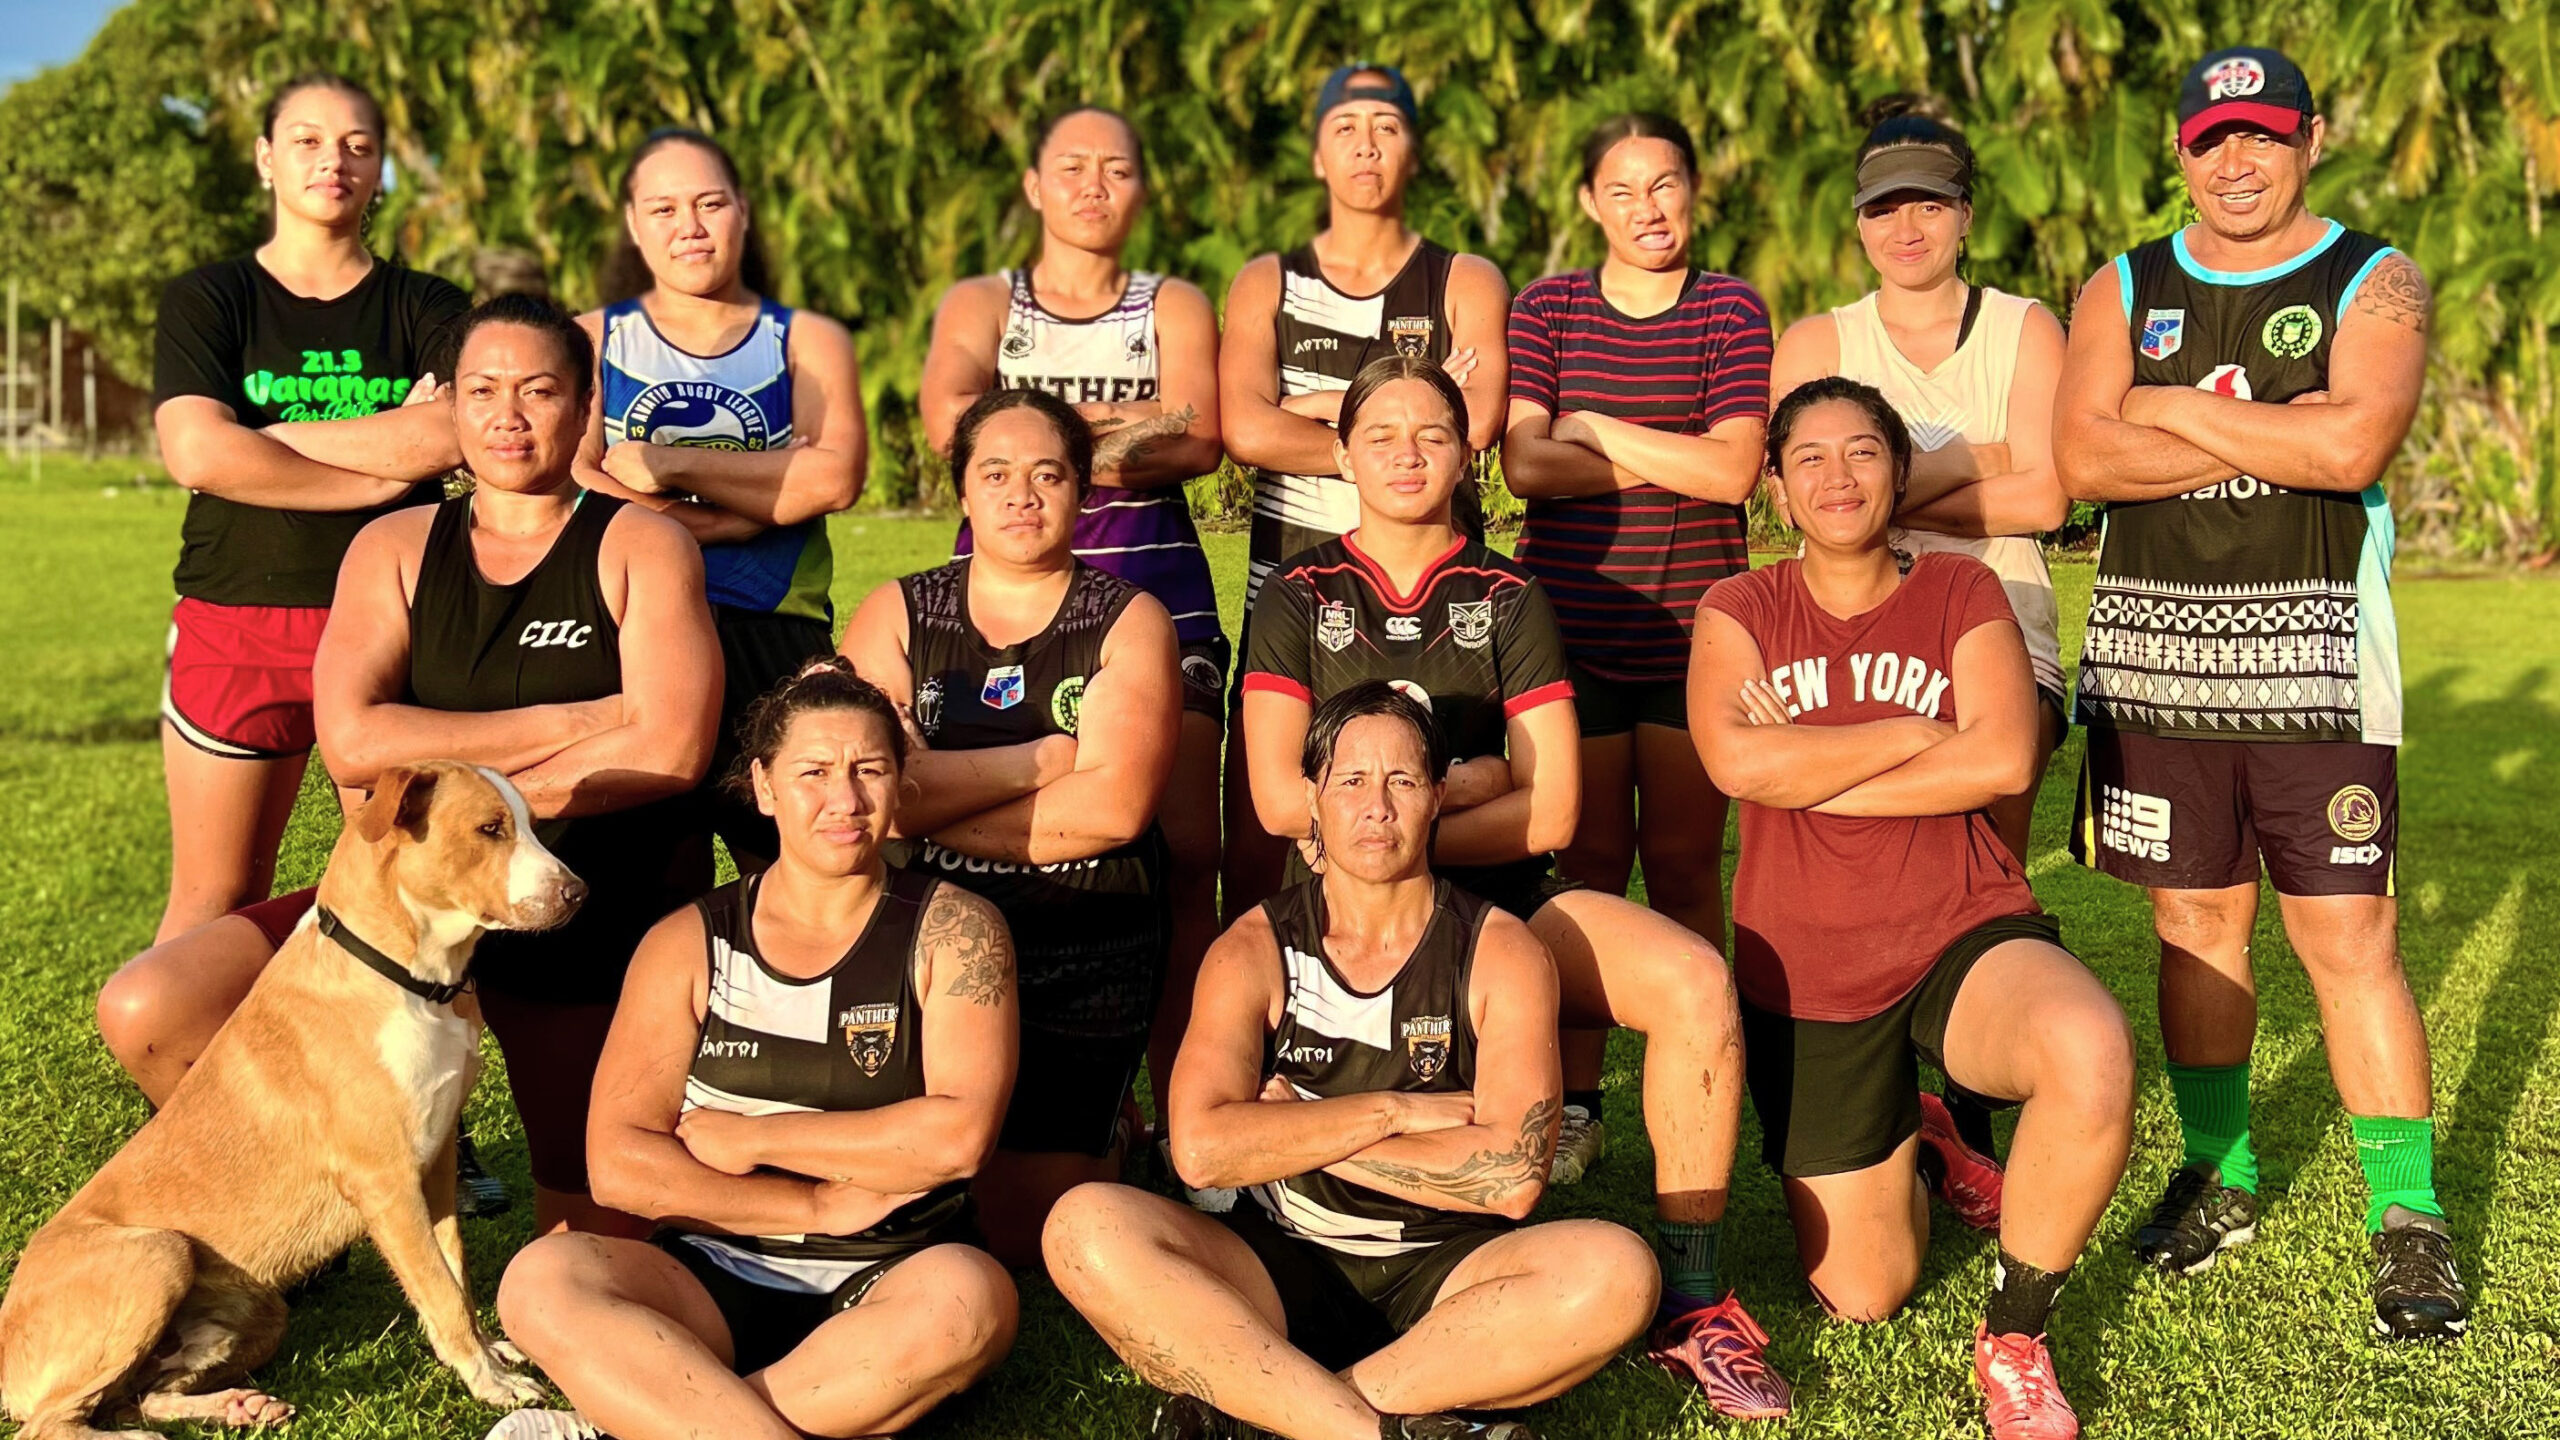 Women’s Rugby league champions eye Nines title